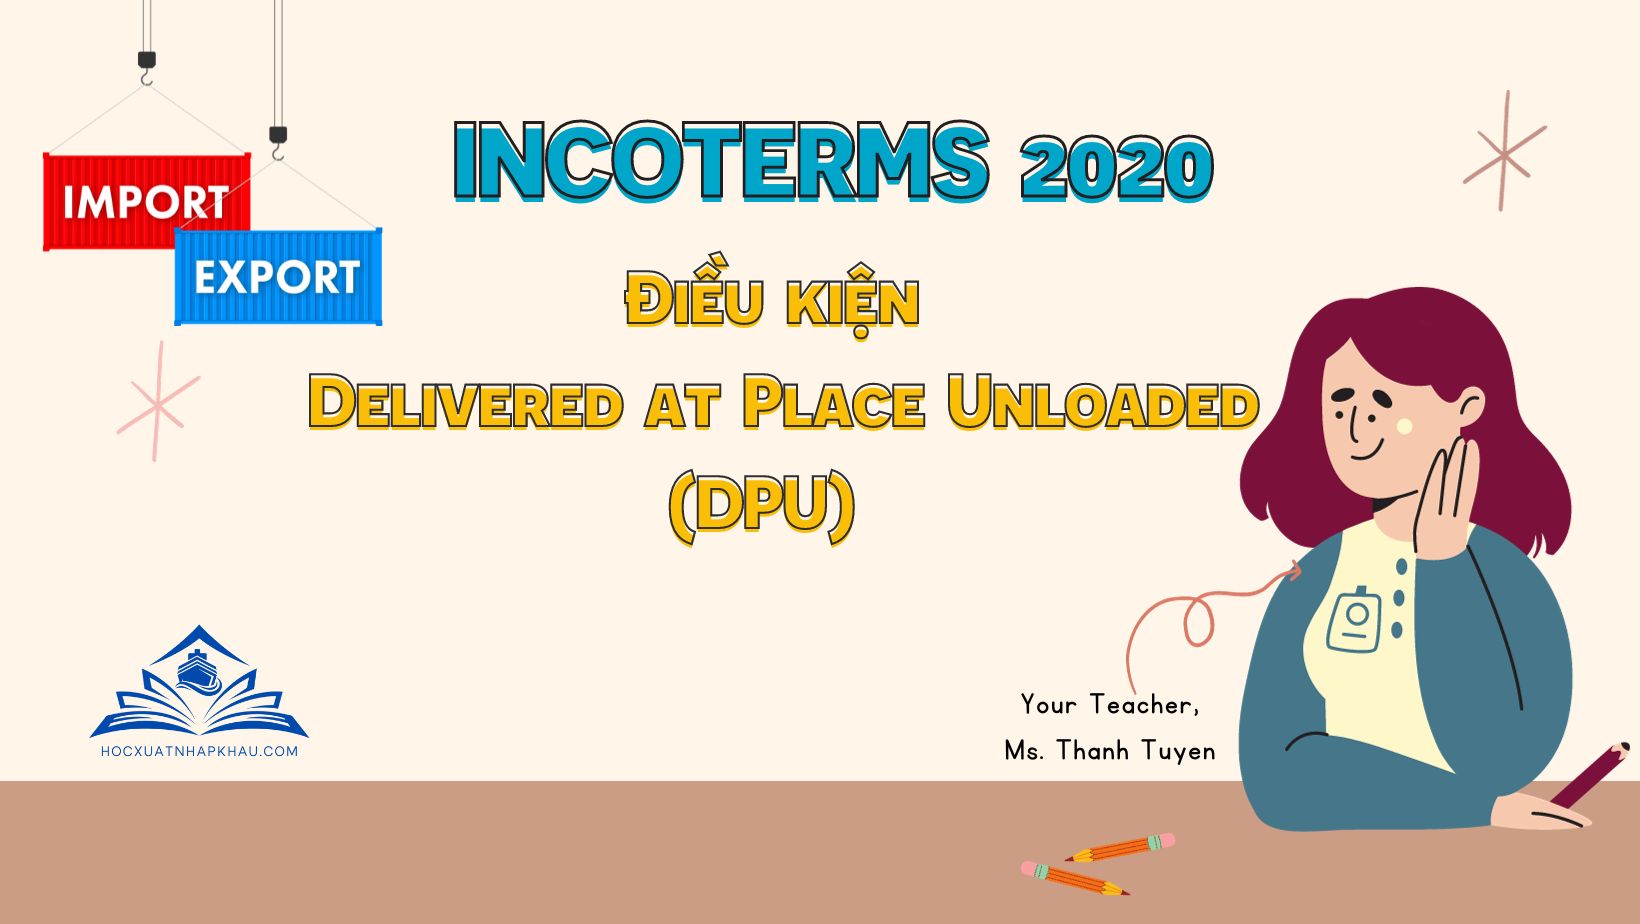 Điều Kiện Delivered At Place Unloaded Dpu Của Incoterms 2020 6518